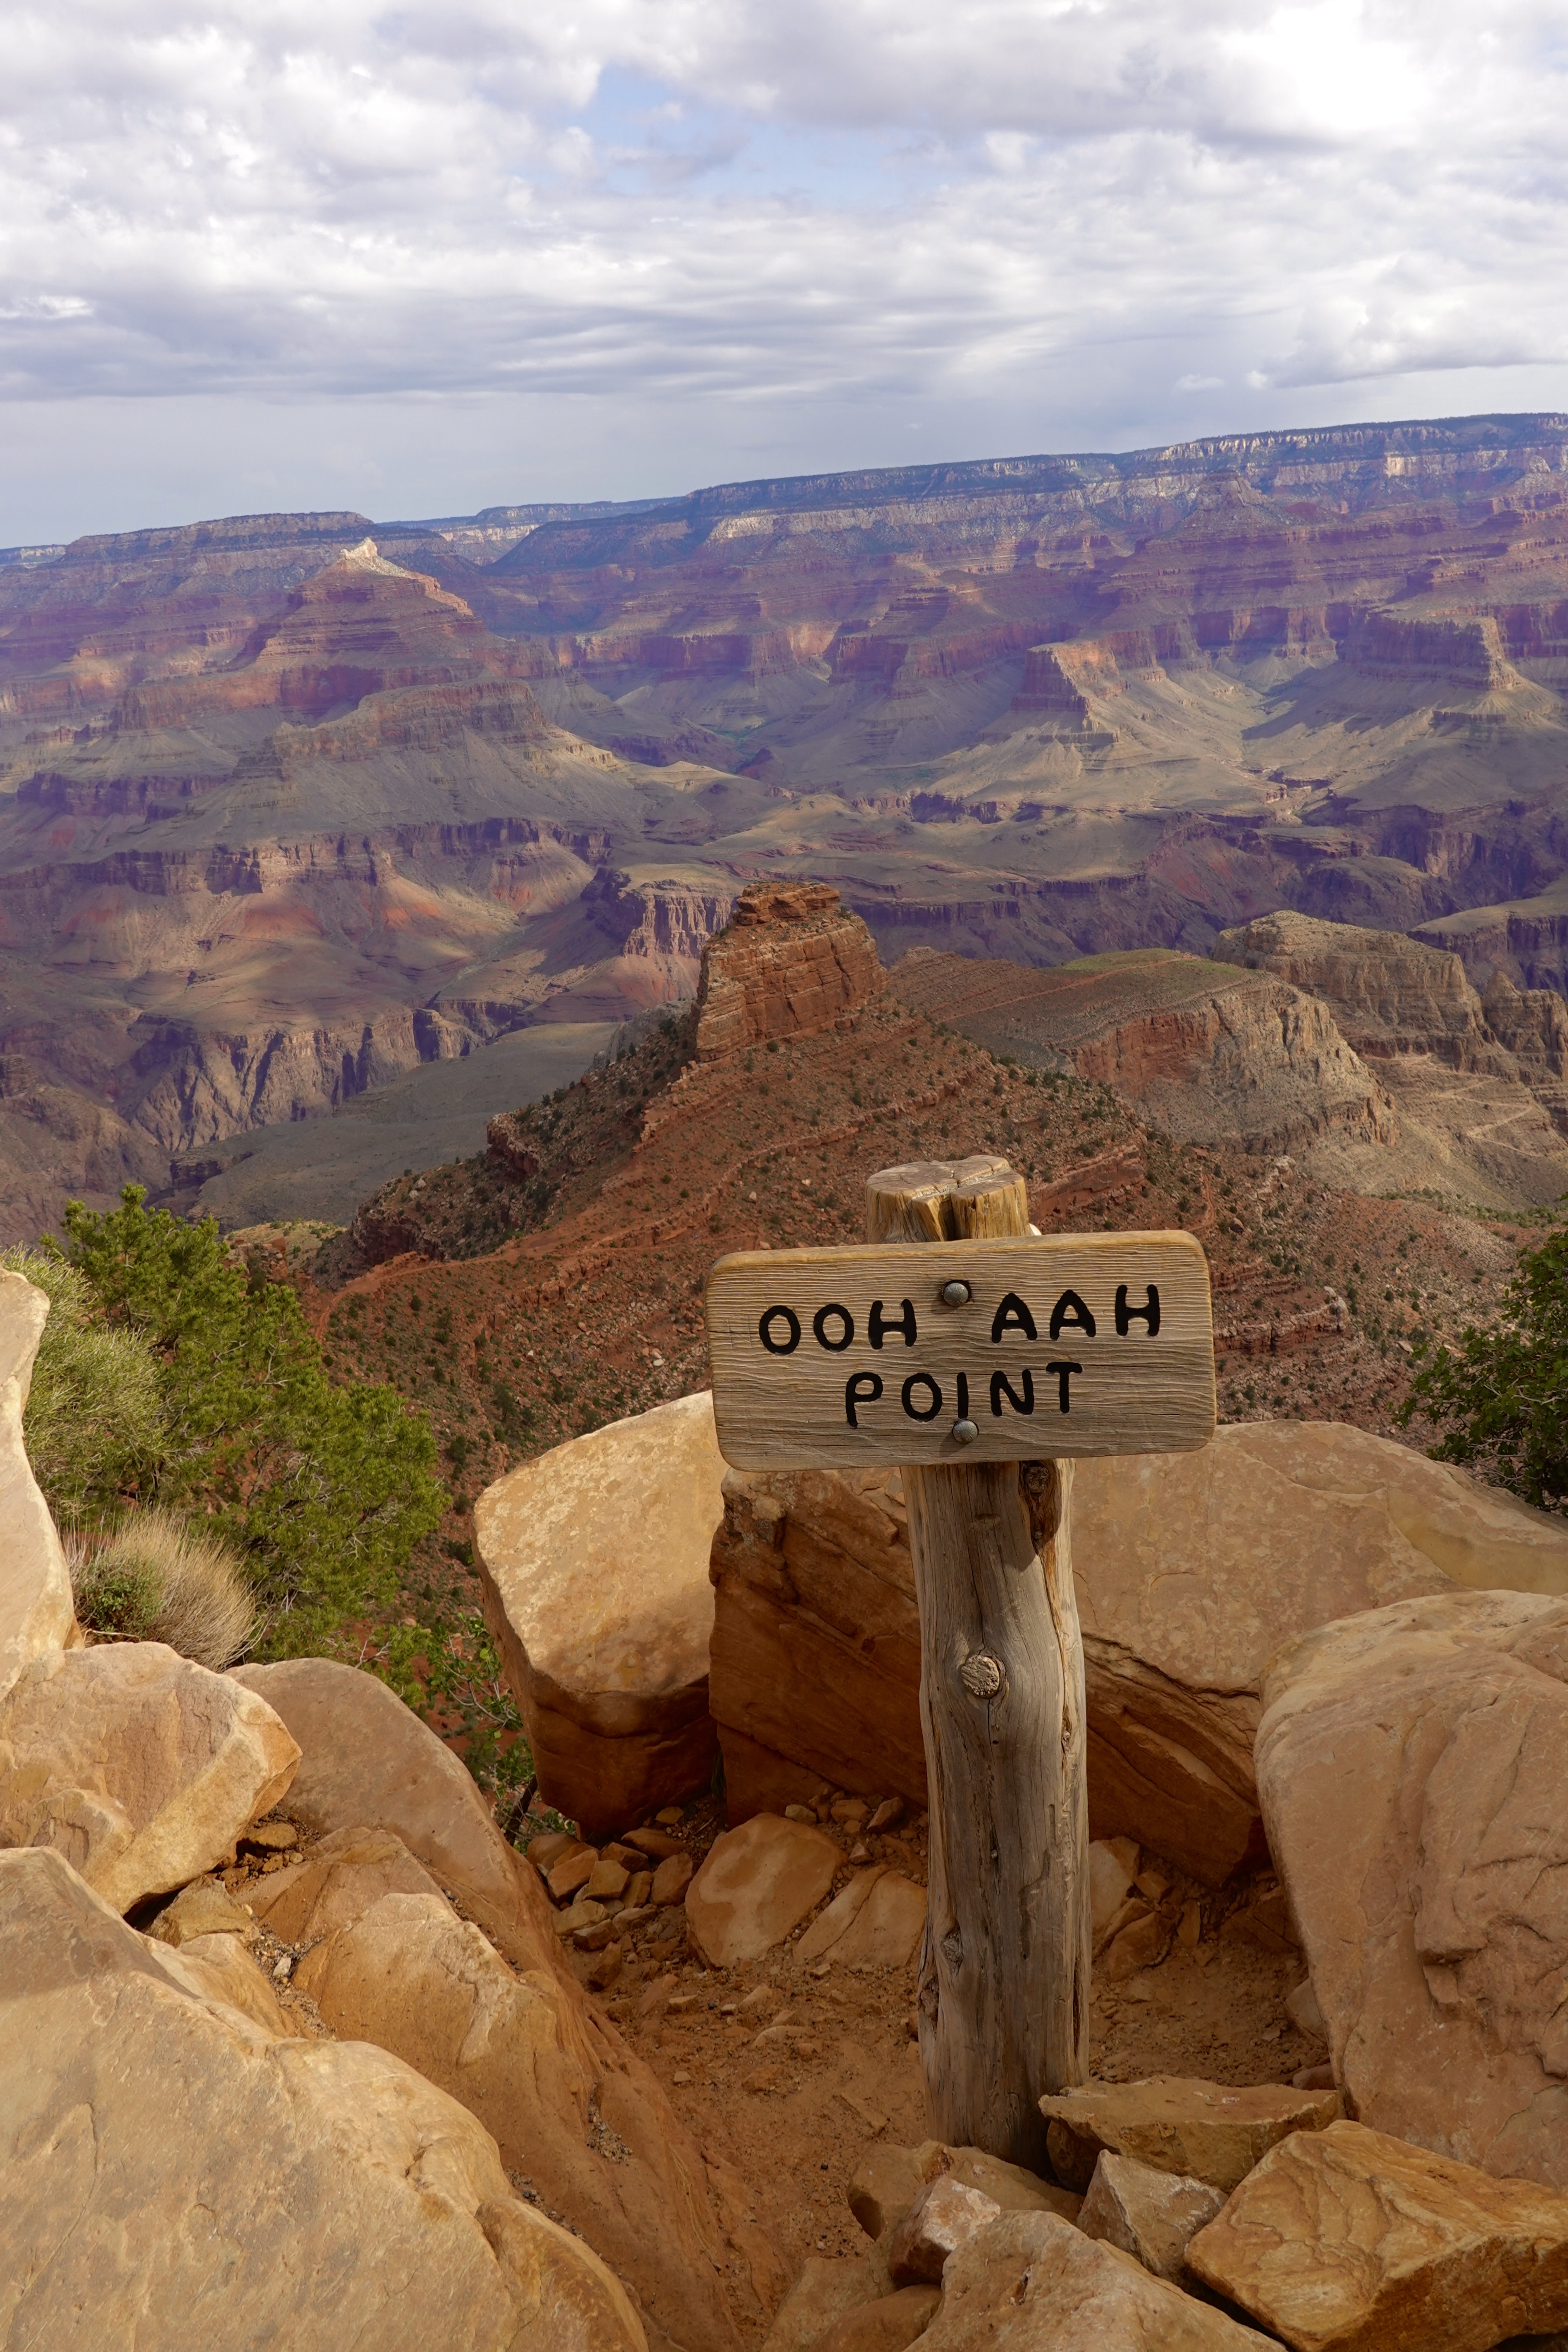 Ooh Aah Point on South Kaibab Trail